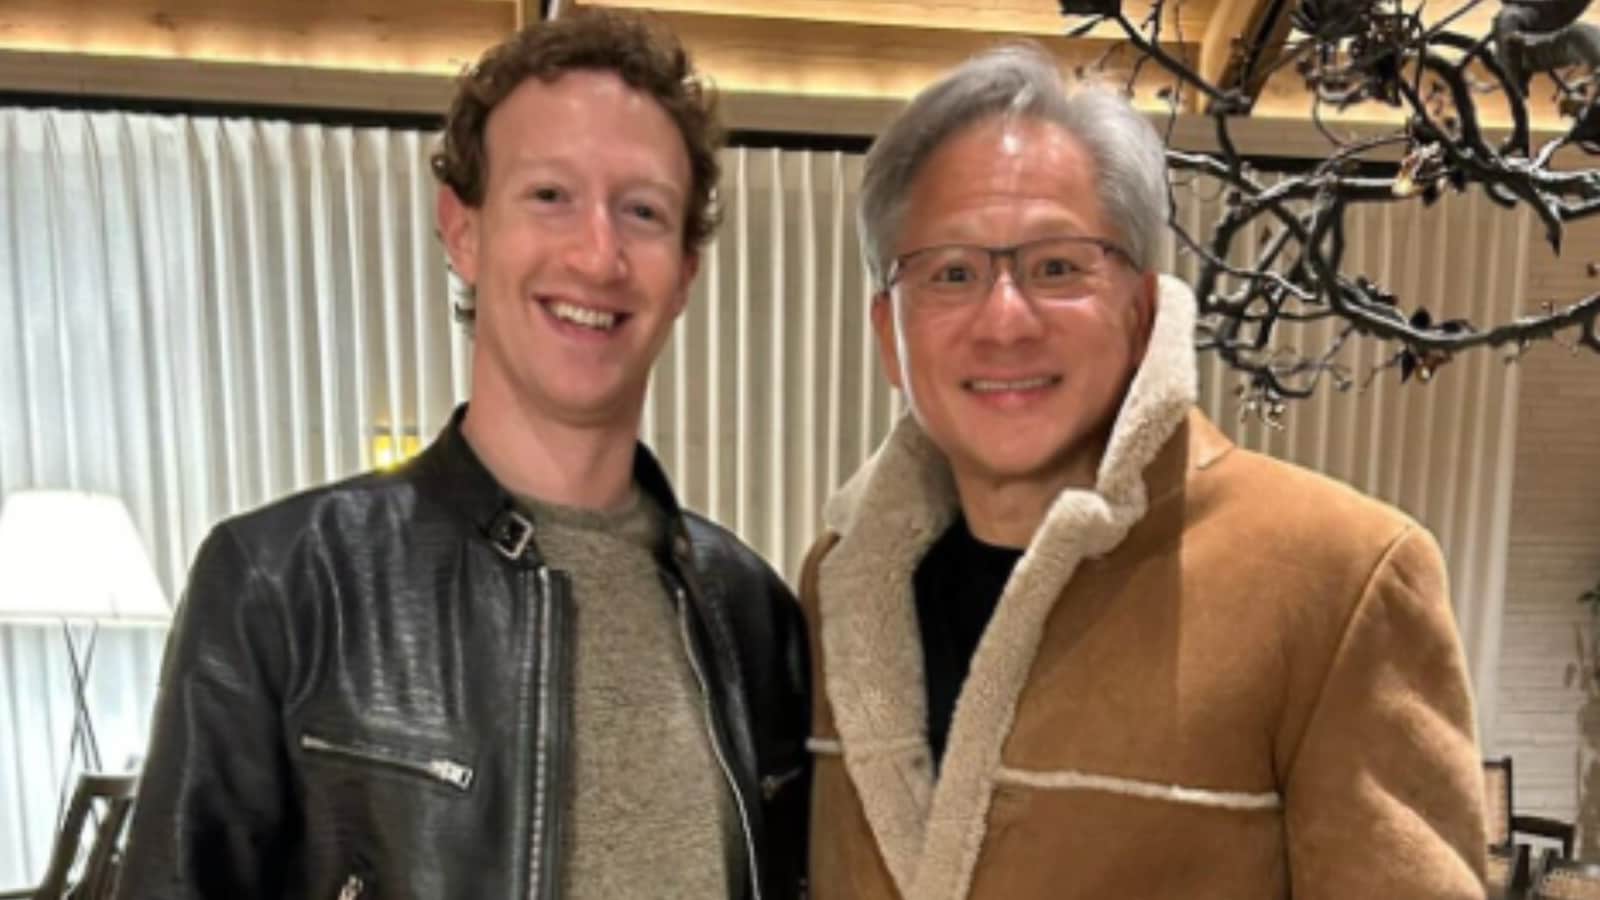 Mark Zuckerberg says Nvidia CEO Jensen Huang is like 'Taylor Swift for tech', wears his iconic leather jacket